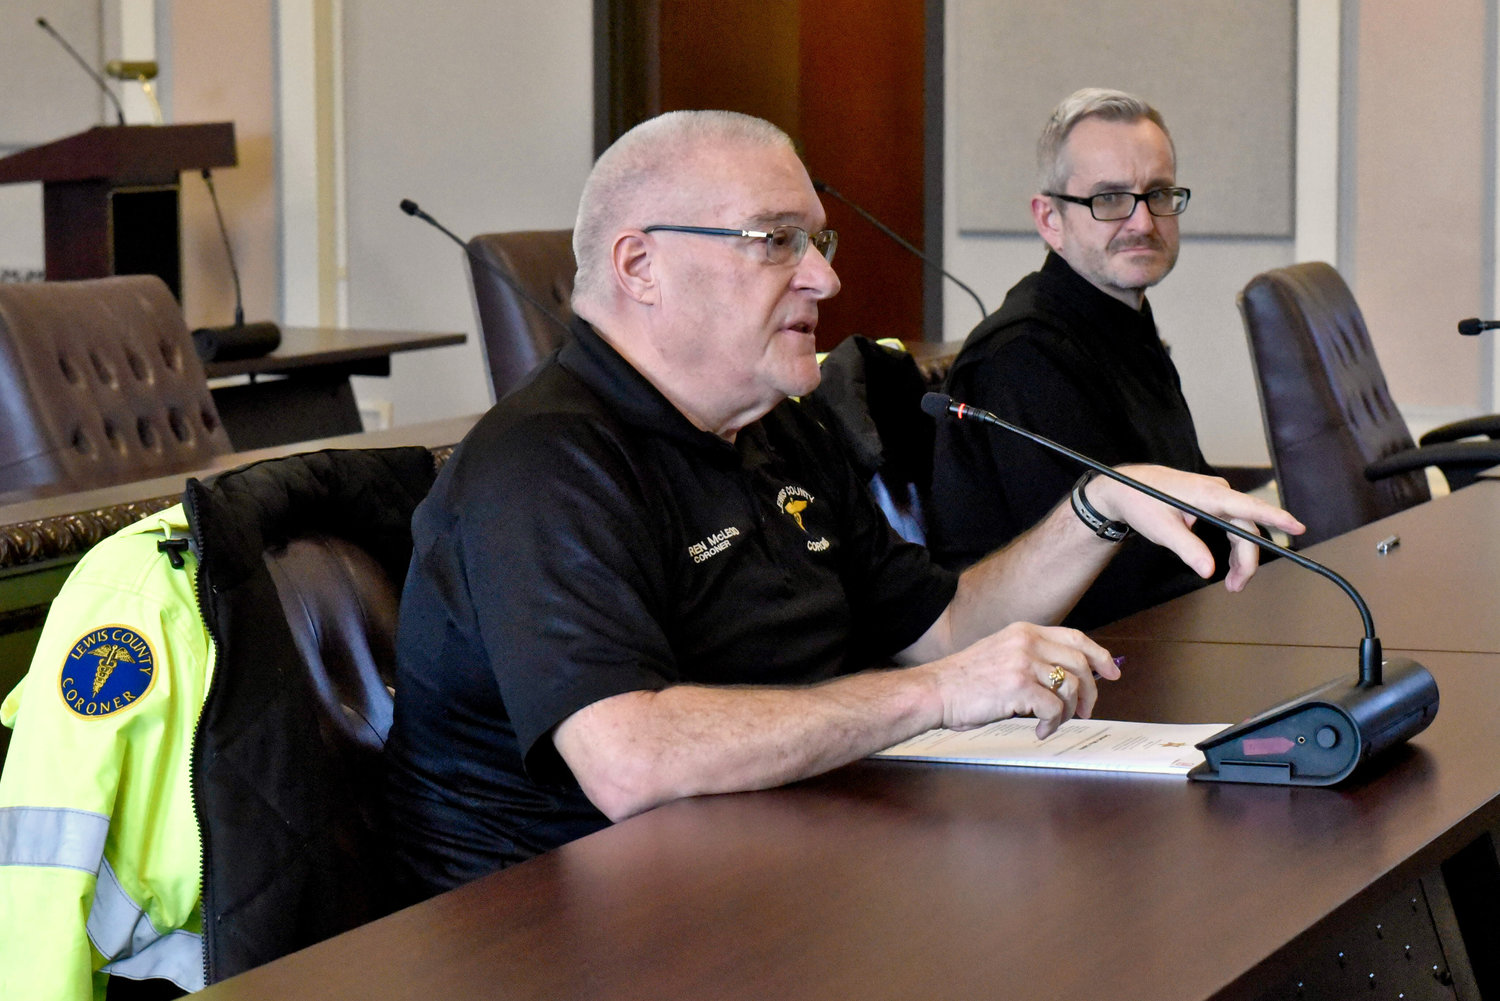 FILE PHOTO — Lewis County Coroner Warren McLeod speaks during a meeting at the Lewis County Courthouse in January, 2023.